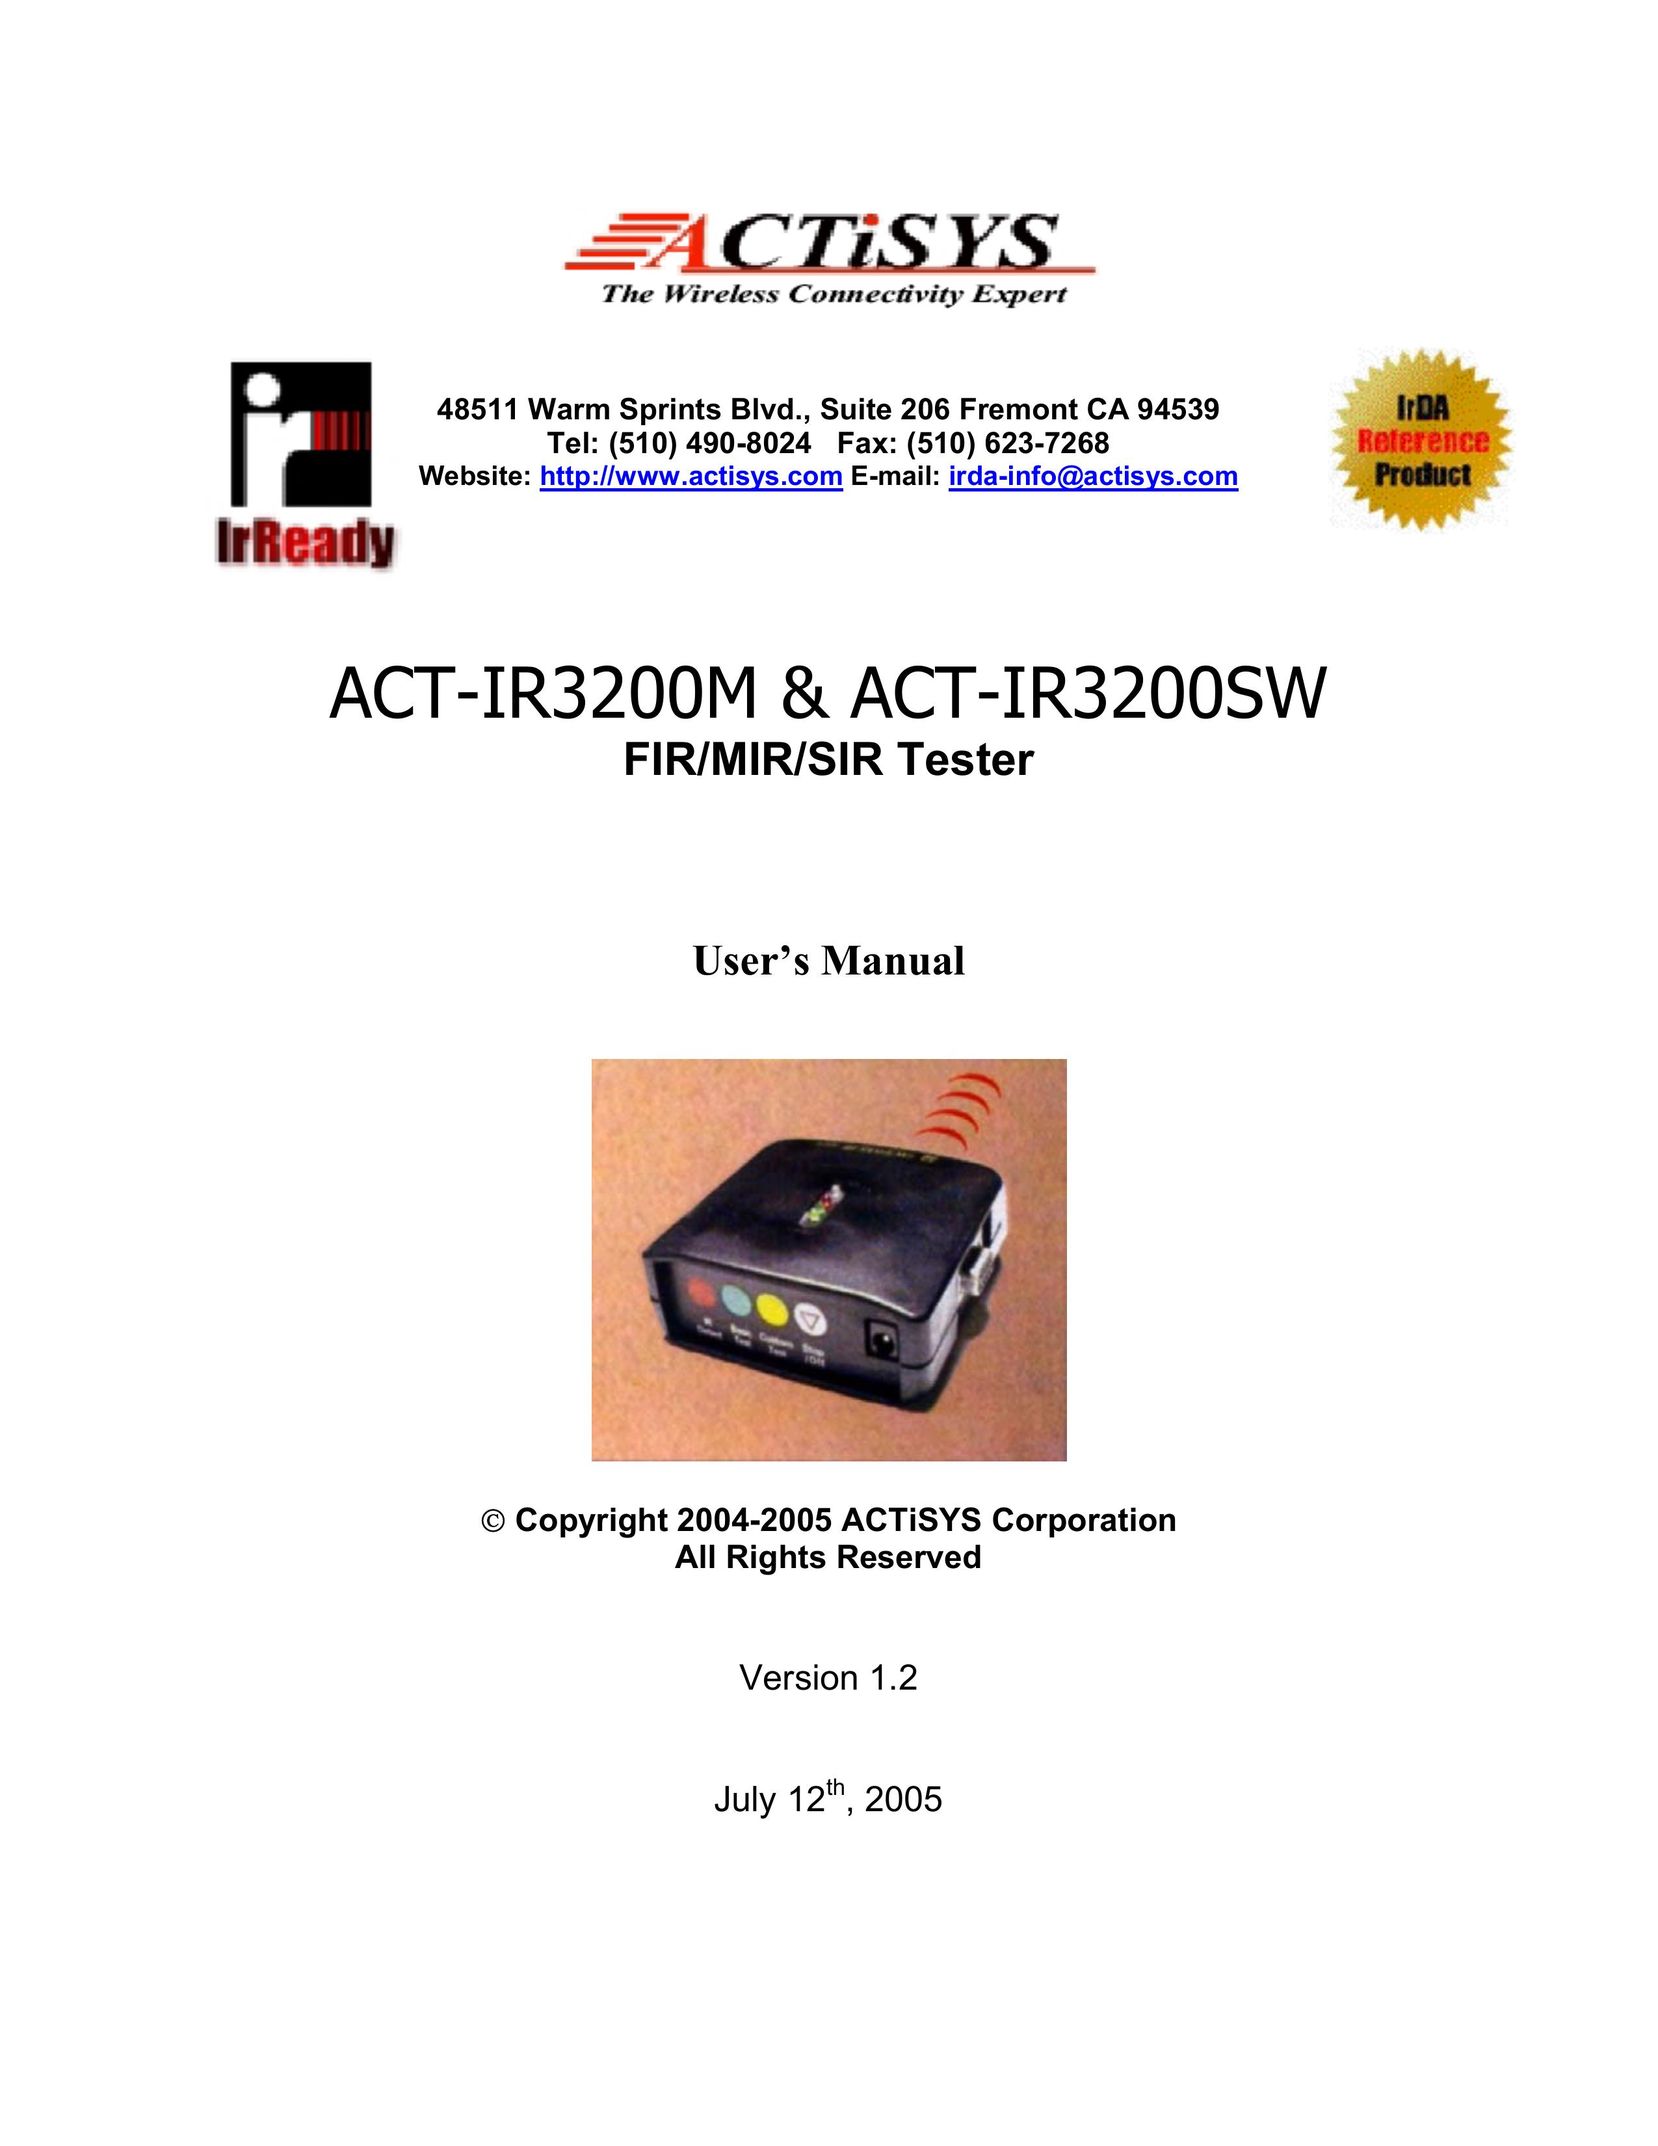 ACTiSYS ACT-IR3200SW Computer Accessories User Manual